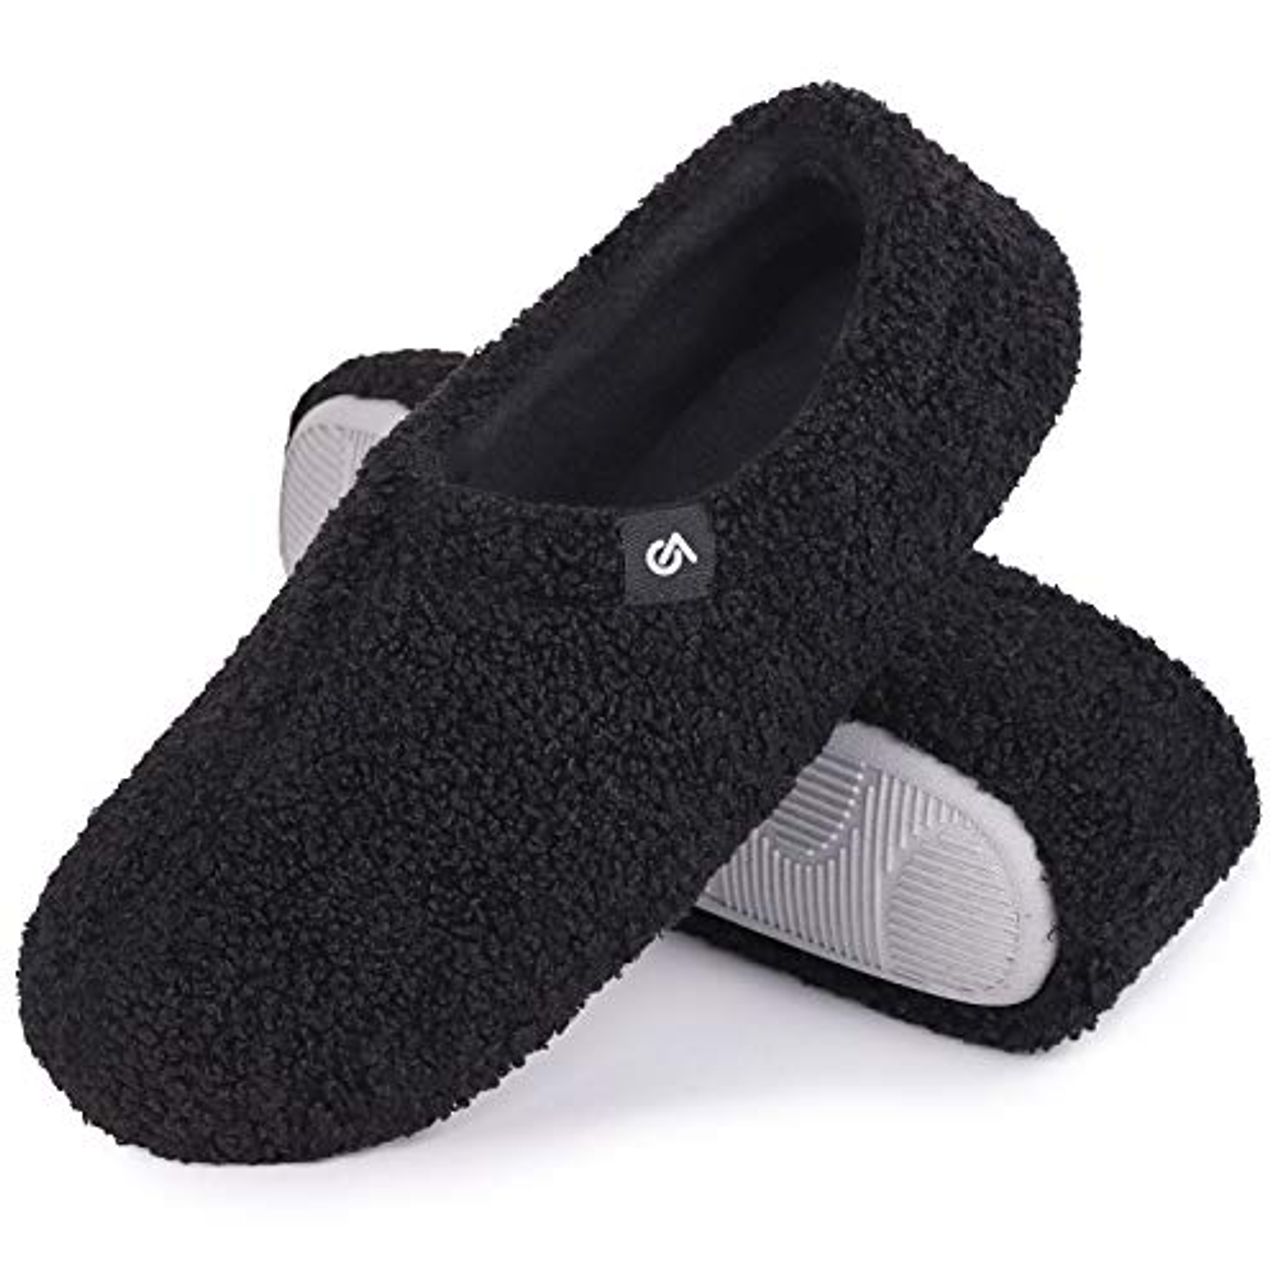 VeraCosy Mens Womens Comfort Micro Wool Felt Memory Foam Loafer Slippers Anti-Skid House Shoes for Indoor Outdoor Use